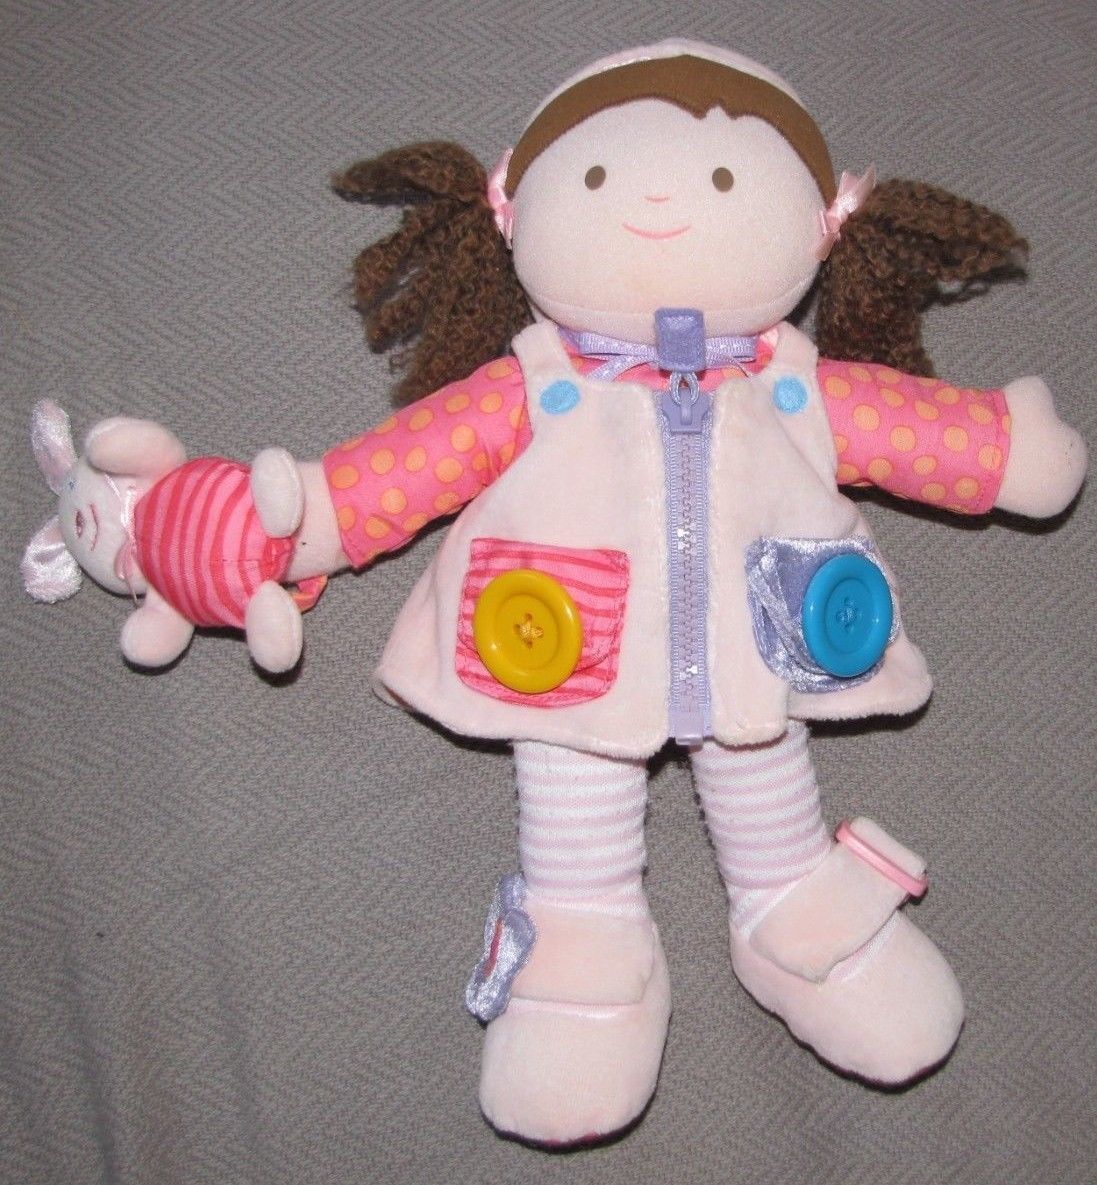 learning doll with zippers and buttons